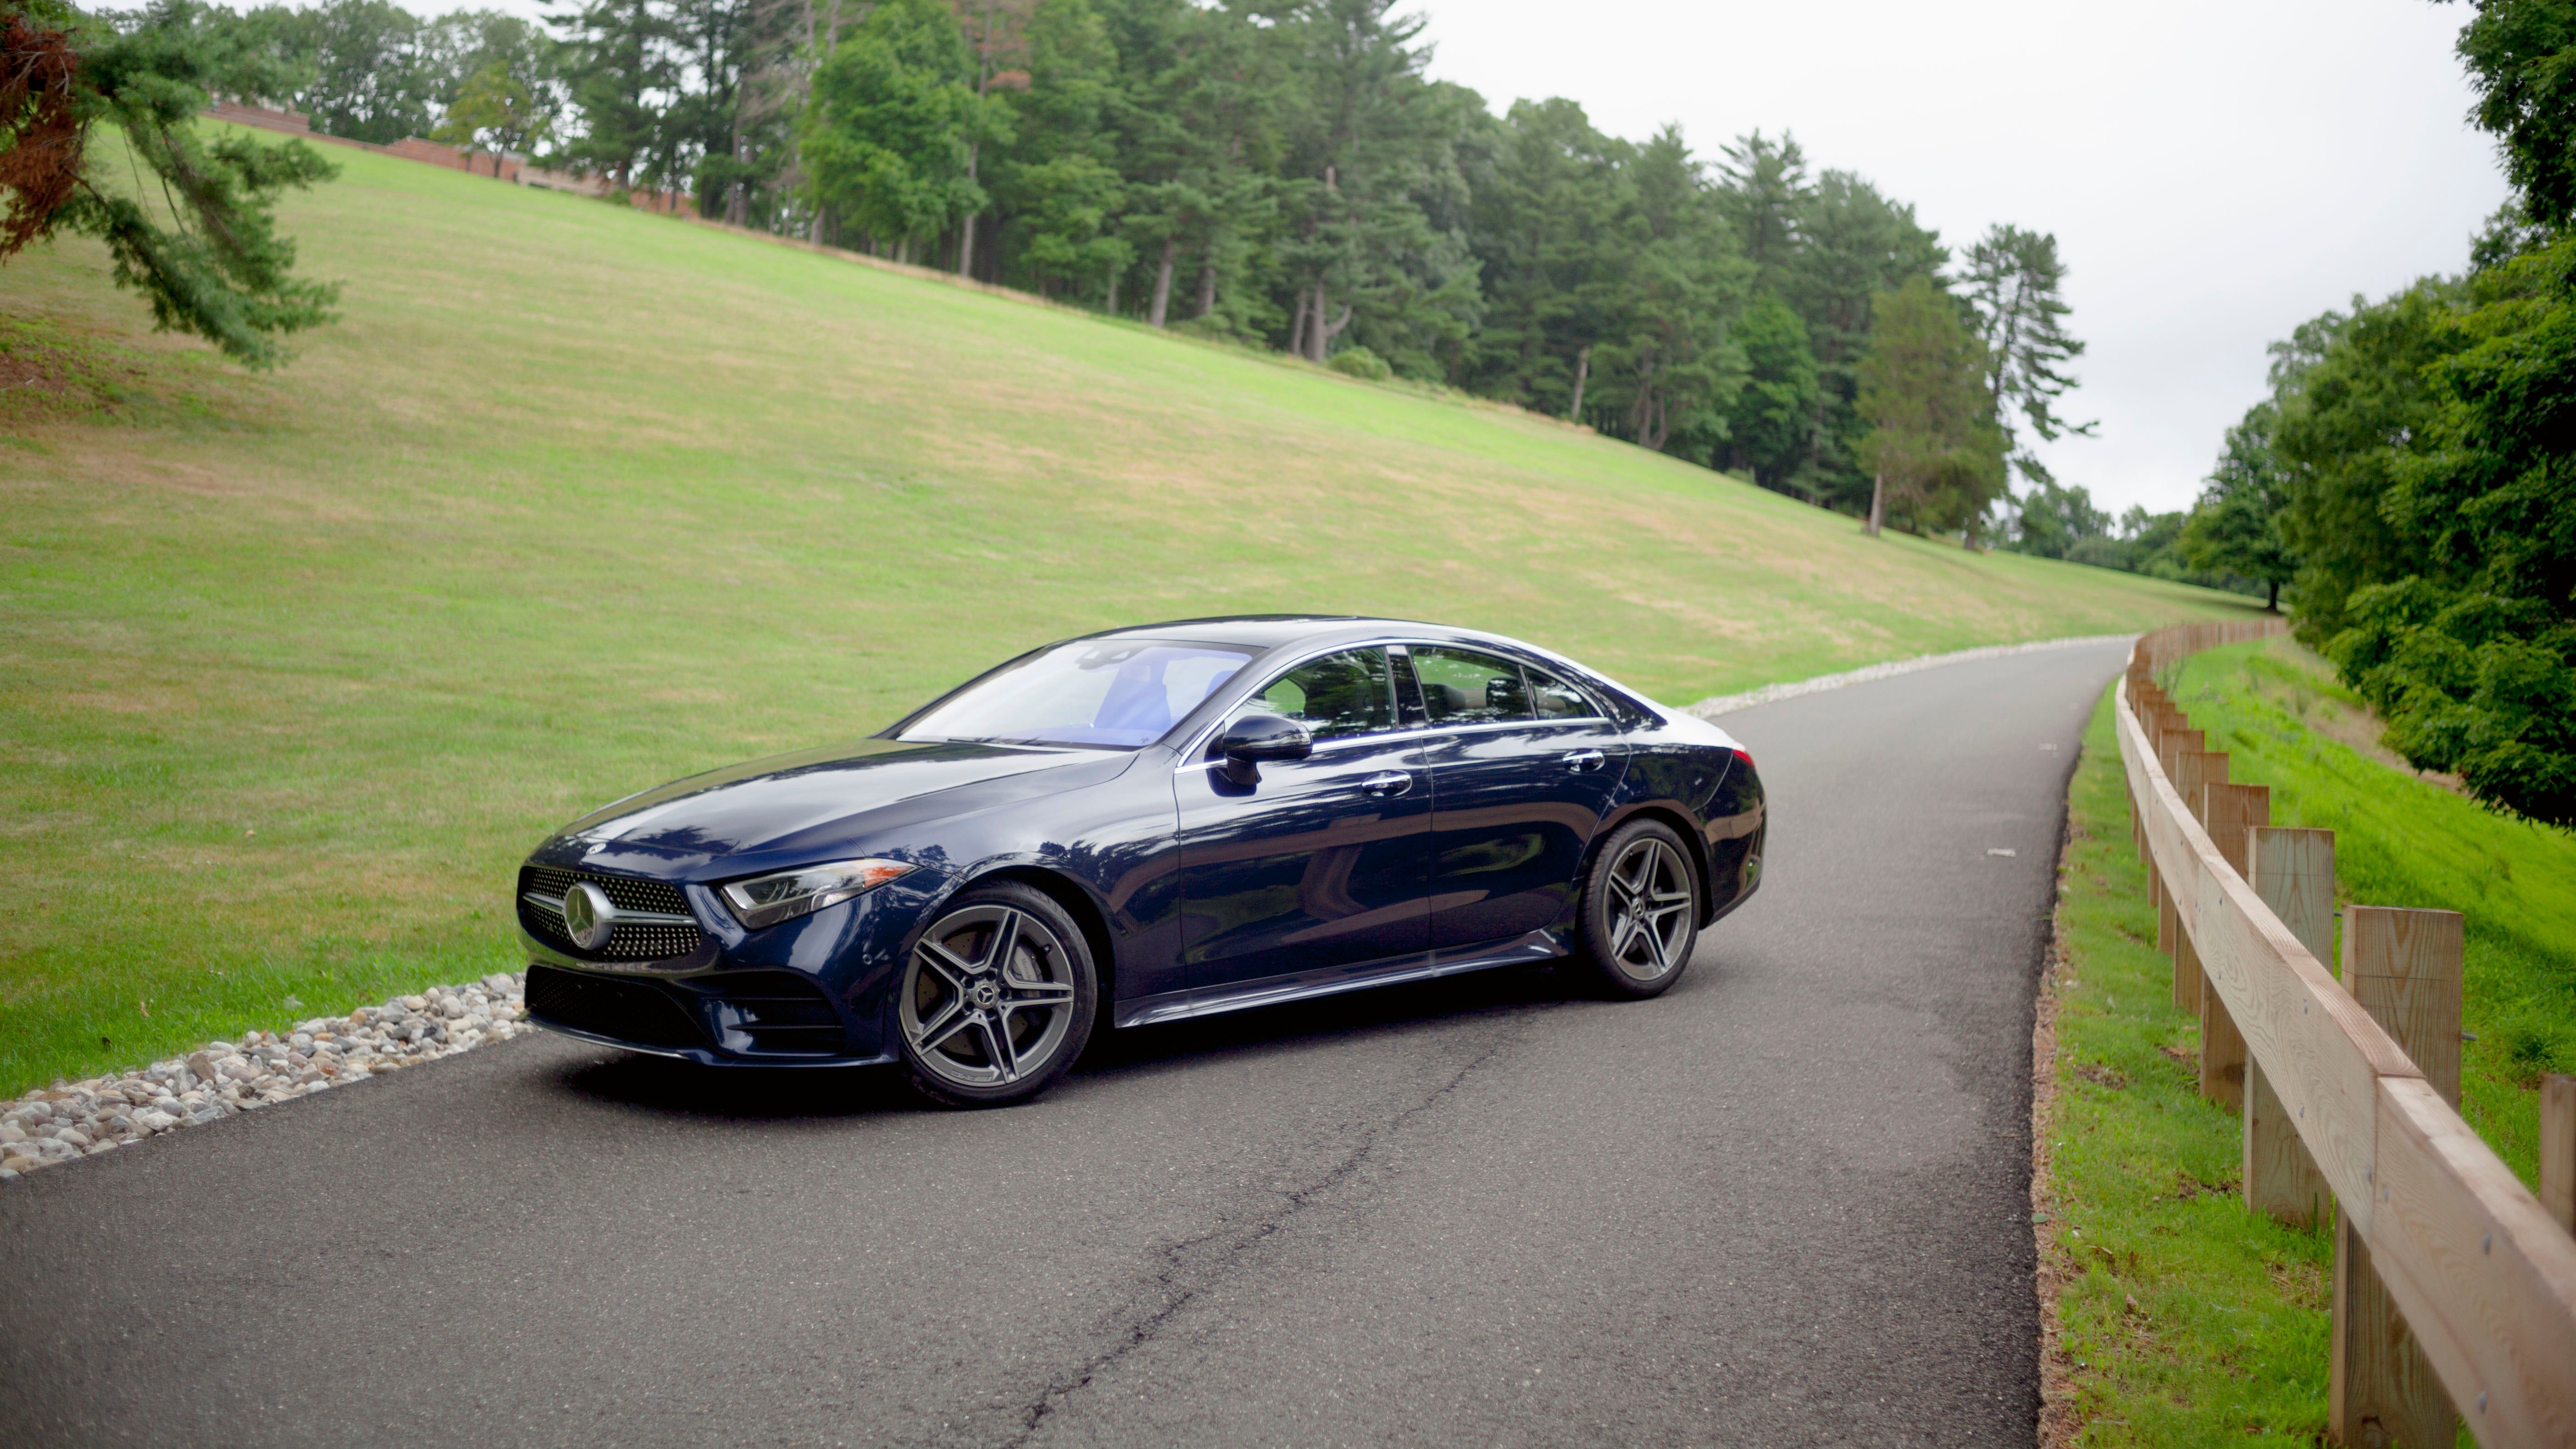 The 2019 Mercedes Benz Cls 450 Is A Glorious Return For The